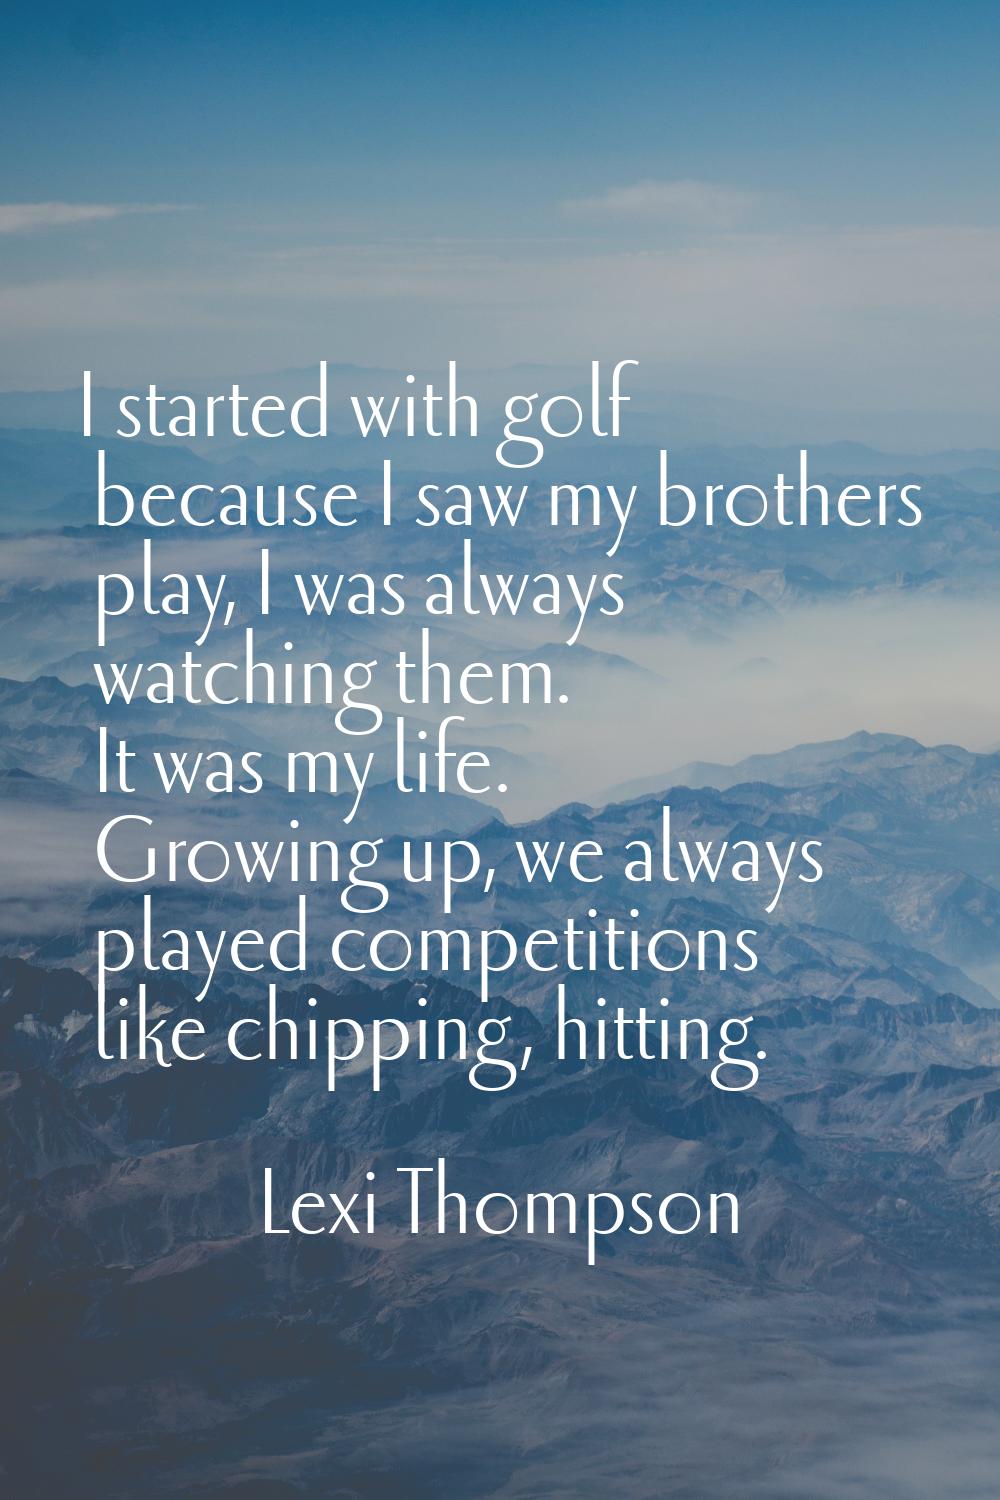 I started with golf because I saw my brothers play, I was always watching them. It was my life. Gro